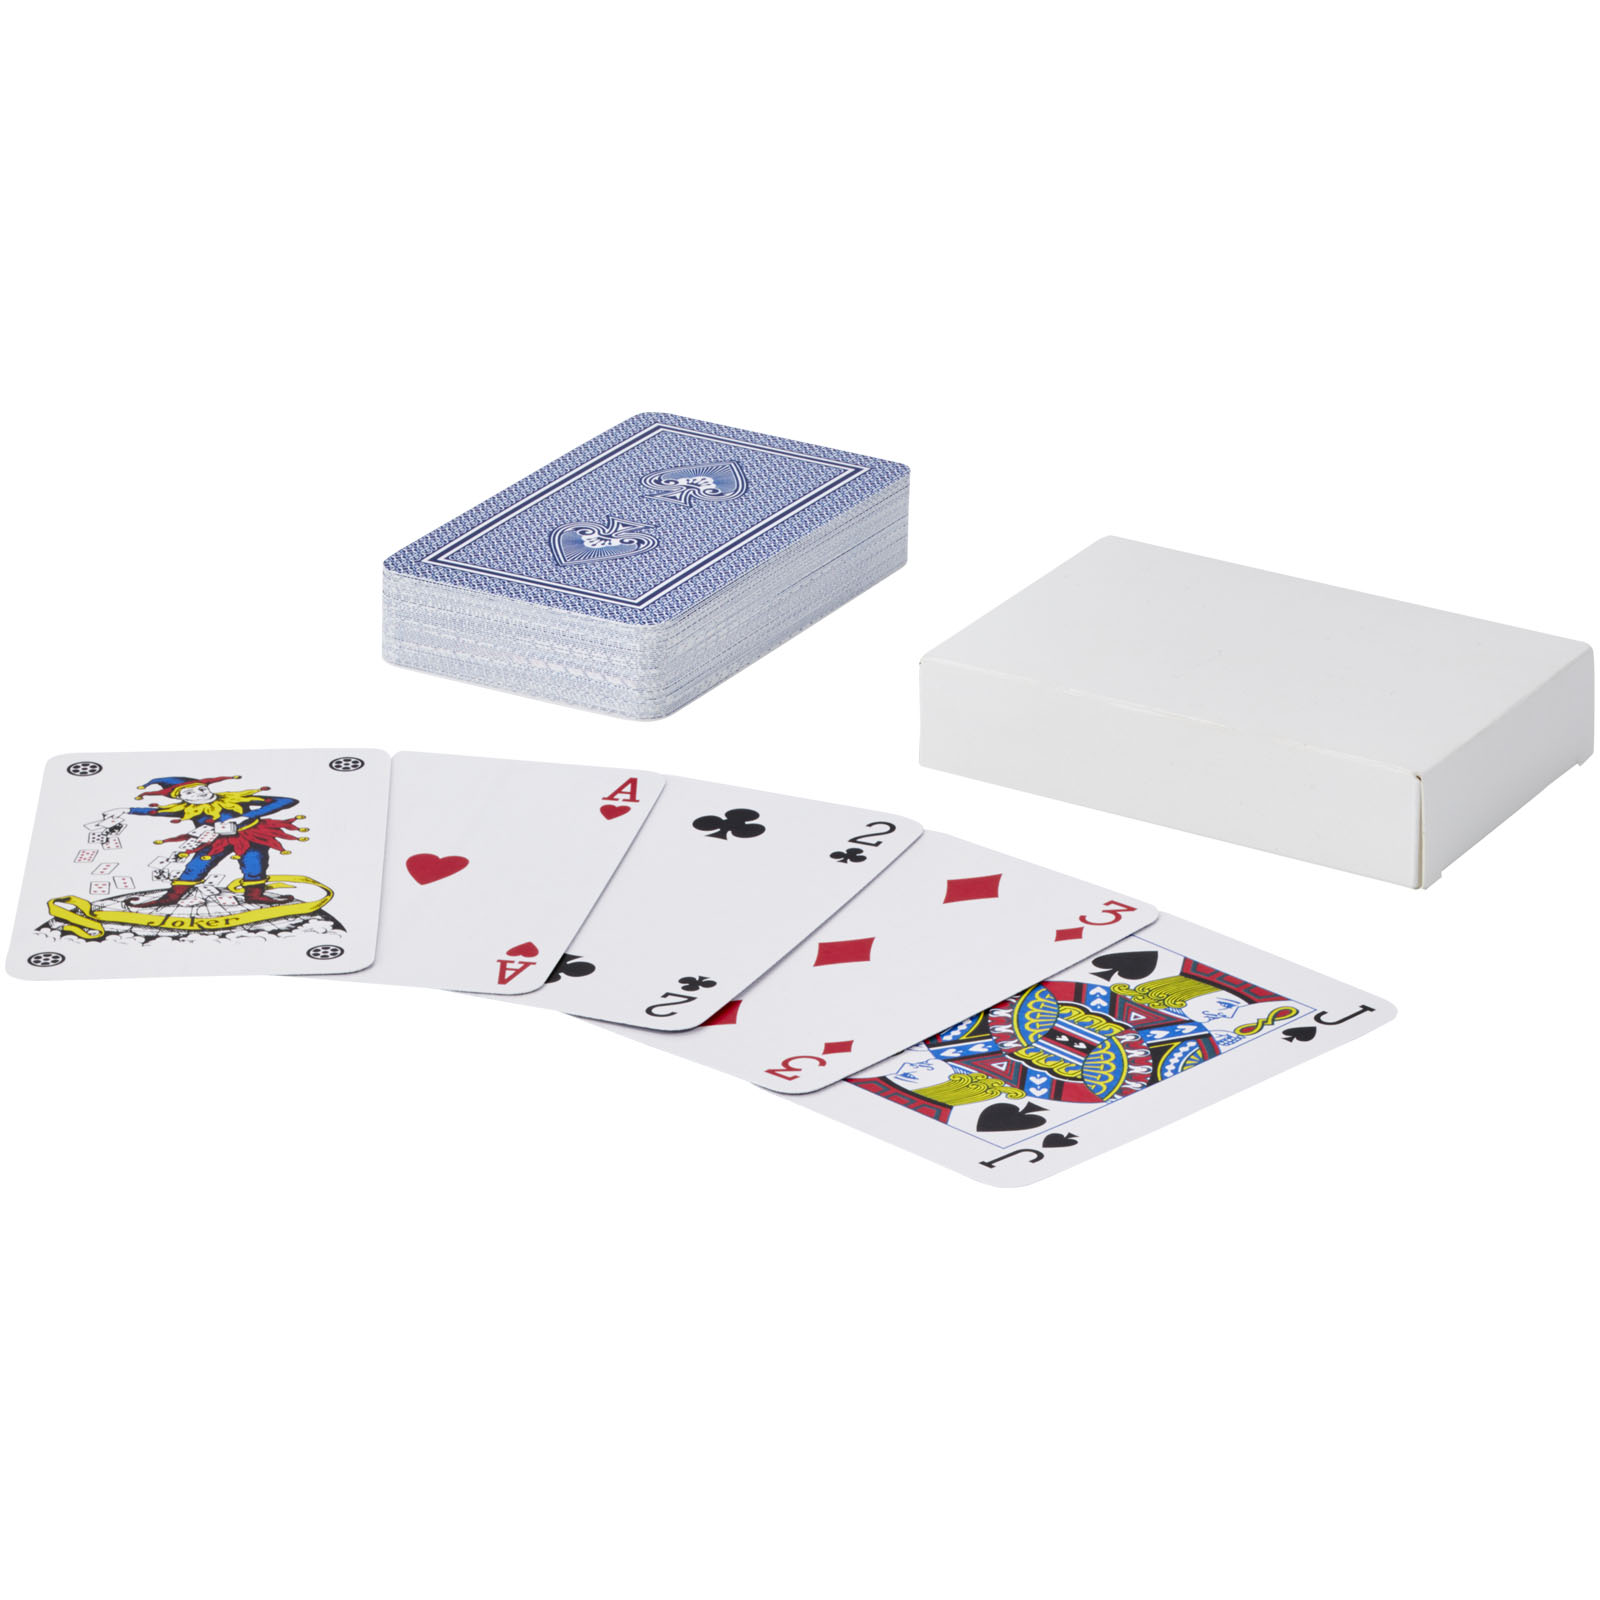 Toys & Games - Ace playing card set